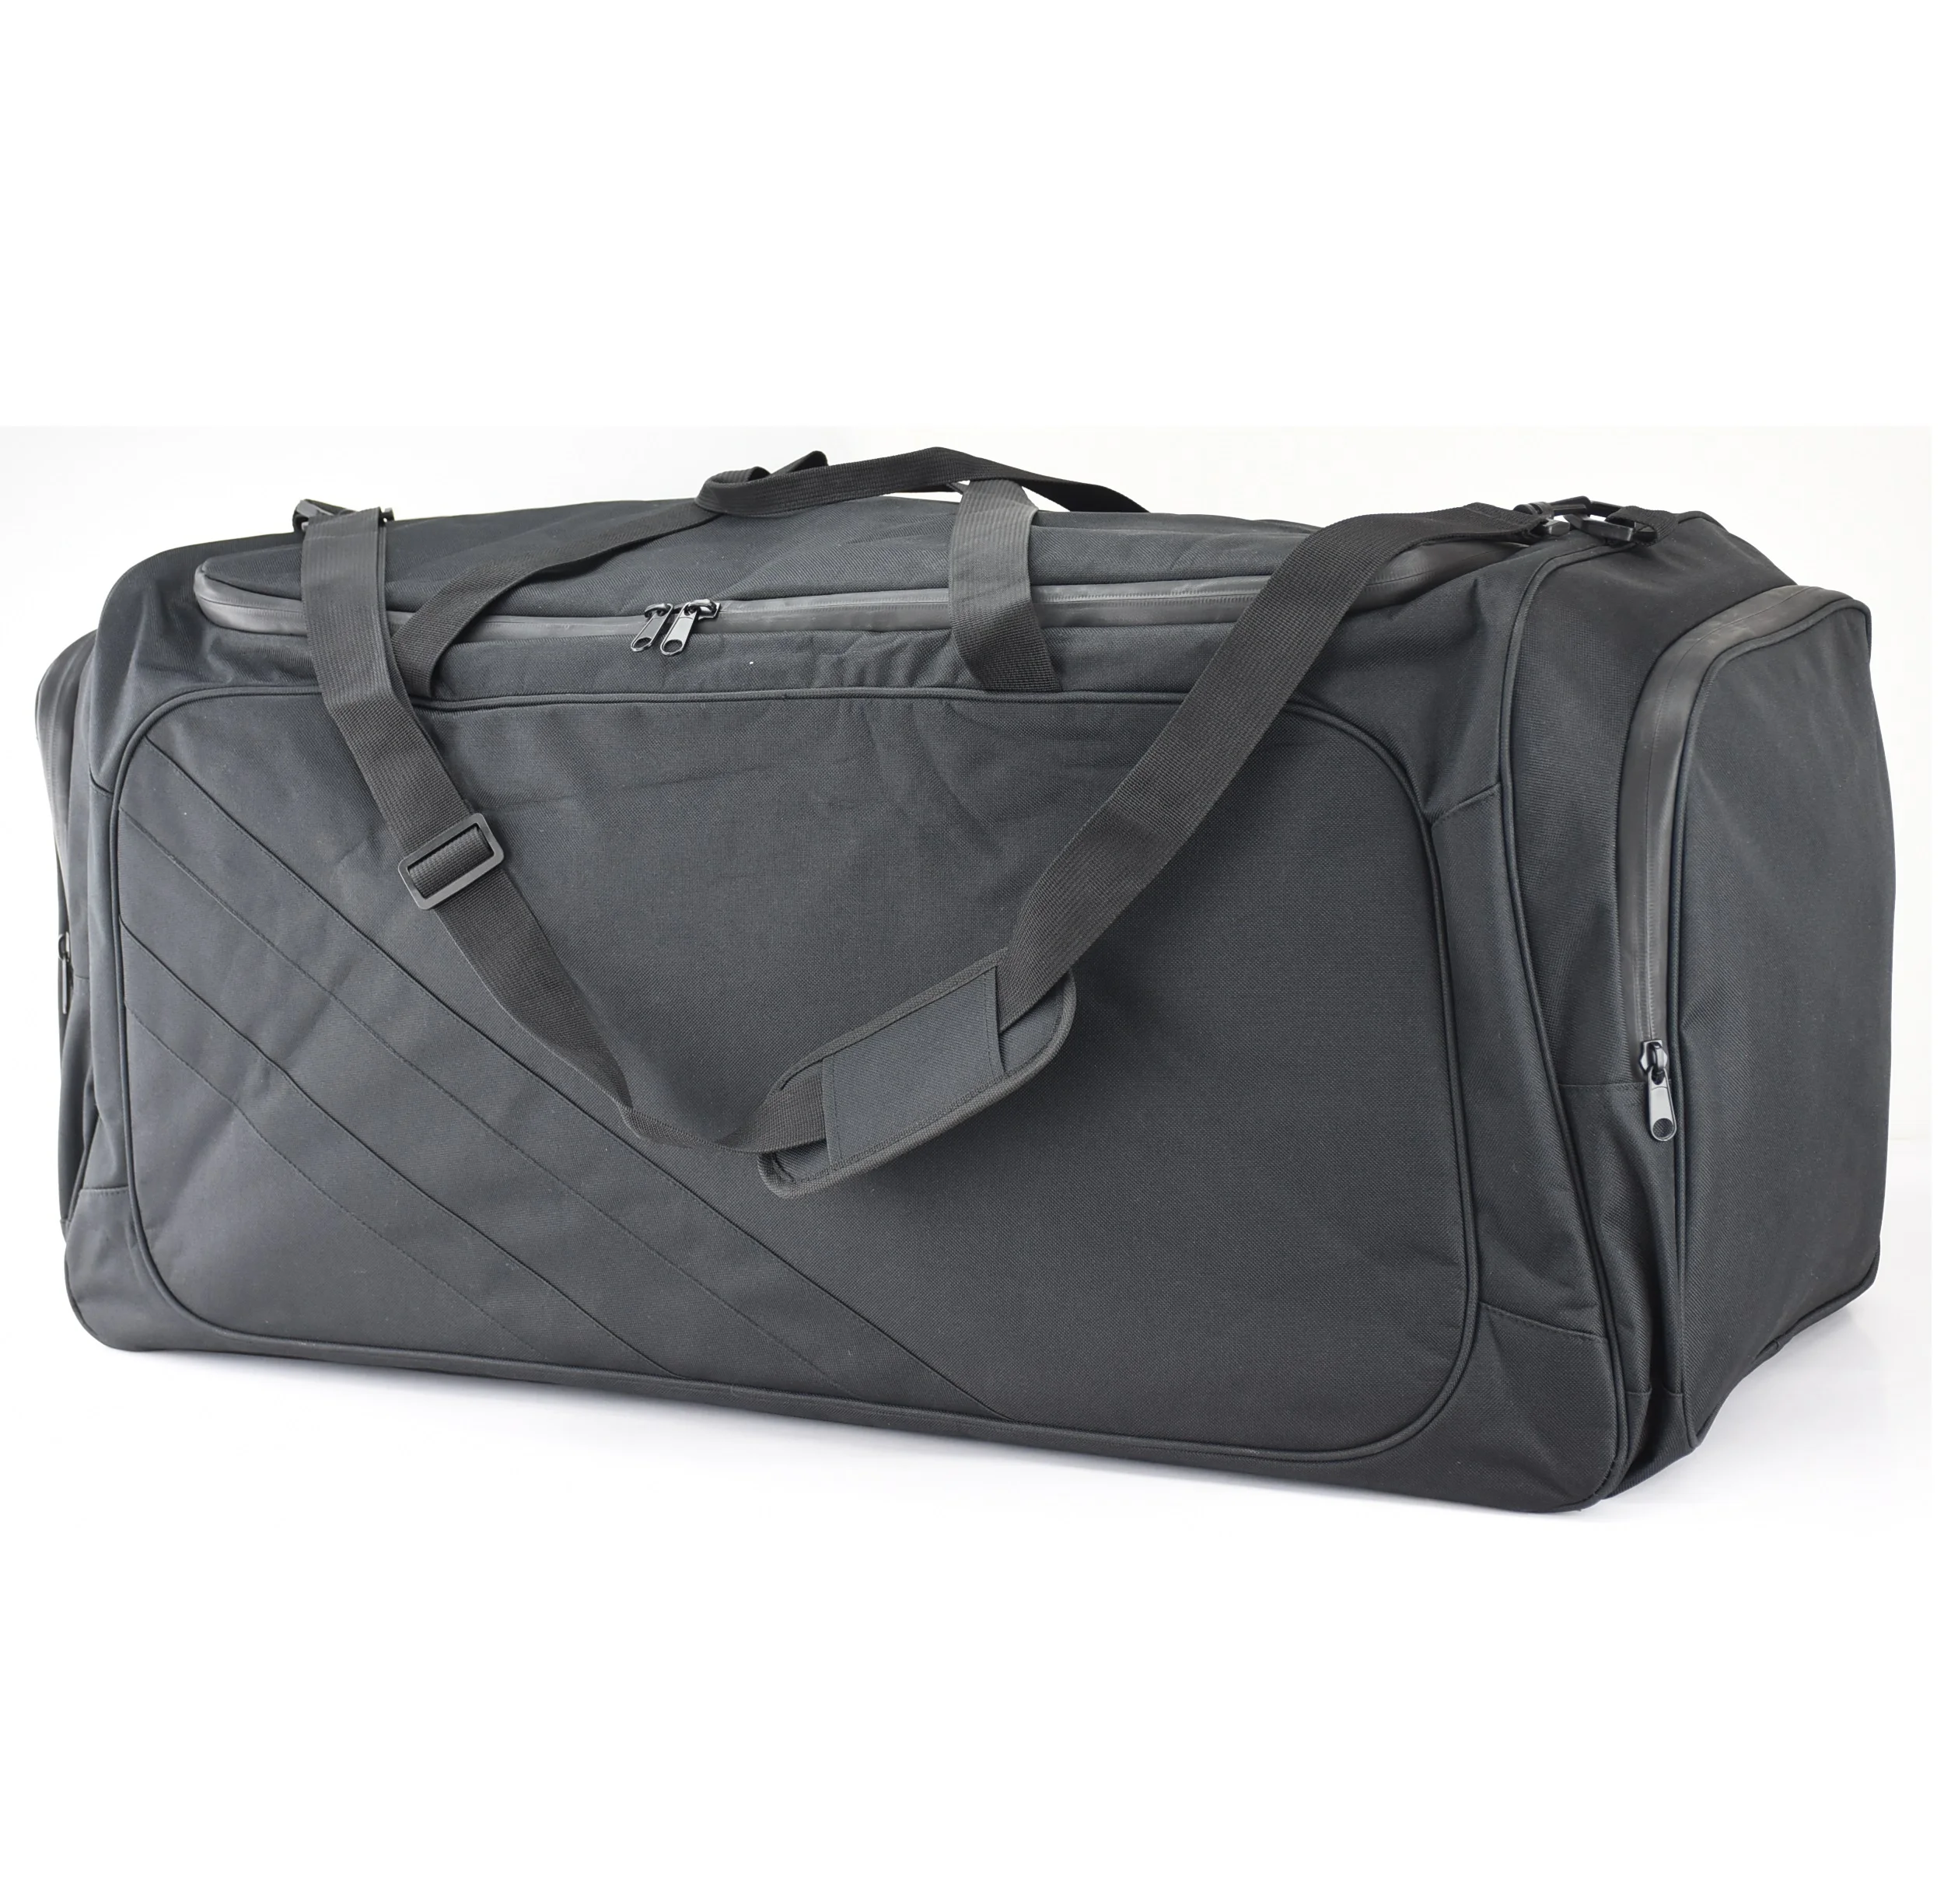 

custom Black large capacity Activated charcoal Carbon lined Smell Proof Duffel Bag with two zipper flap